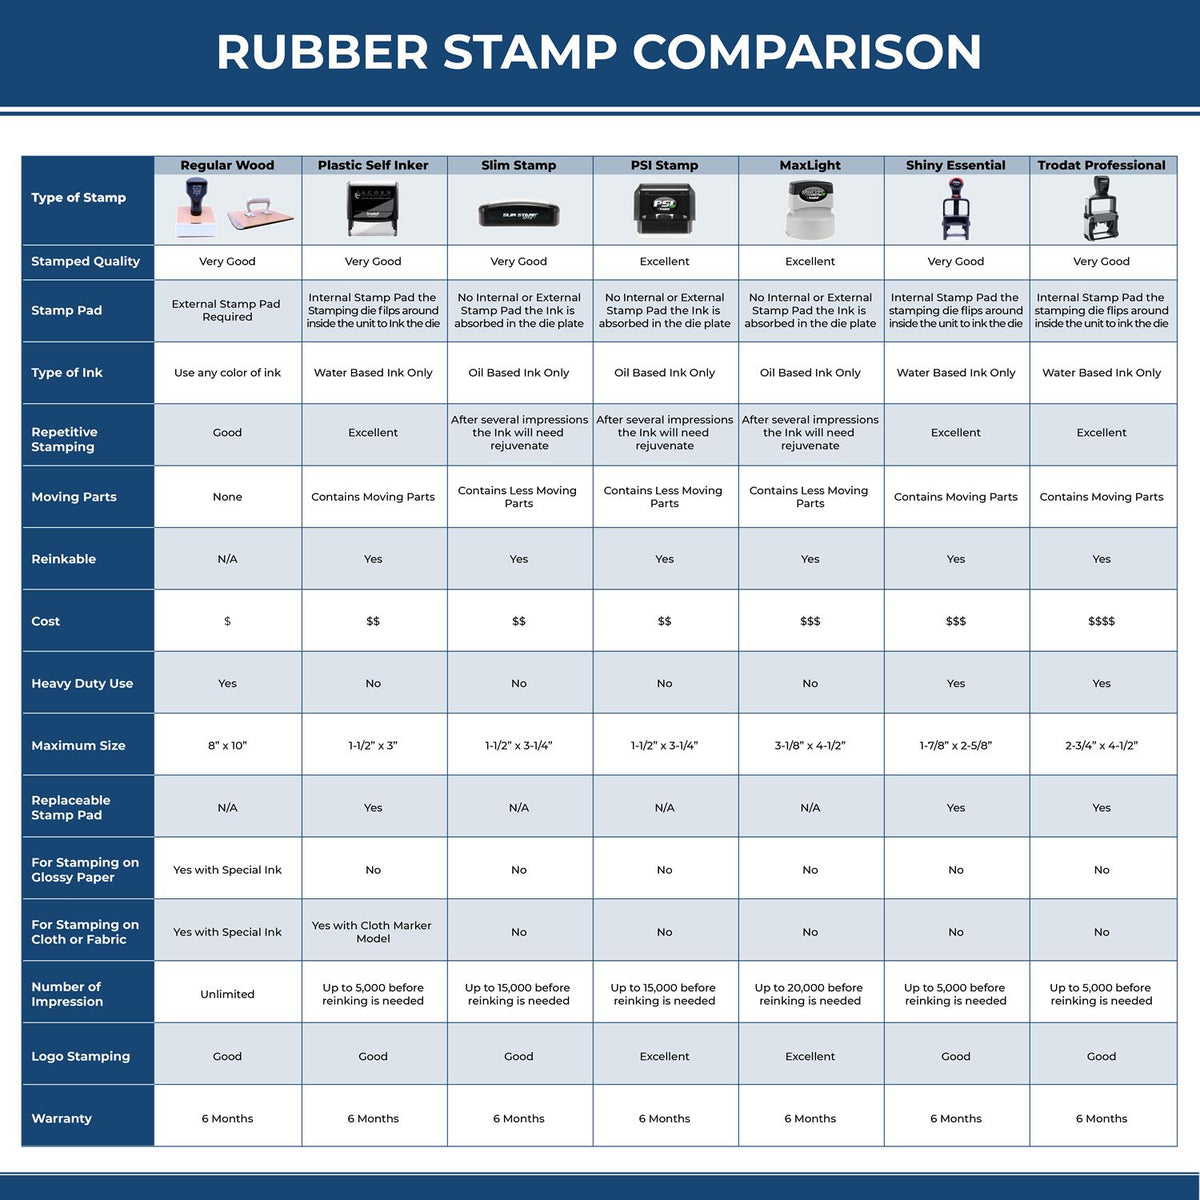 A comparison chart for the different types of mount models available for the PSI Alaska Notary Stamp.